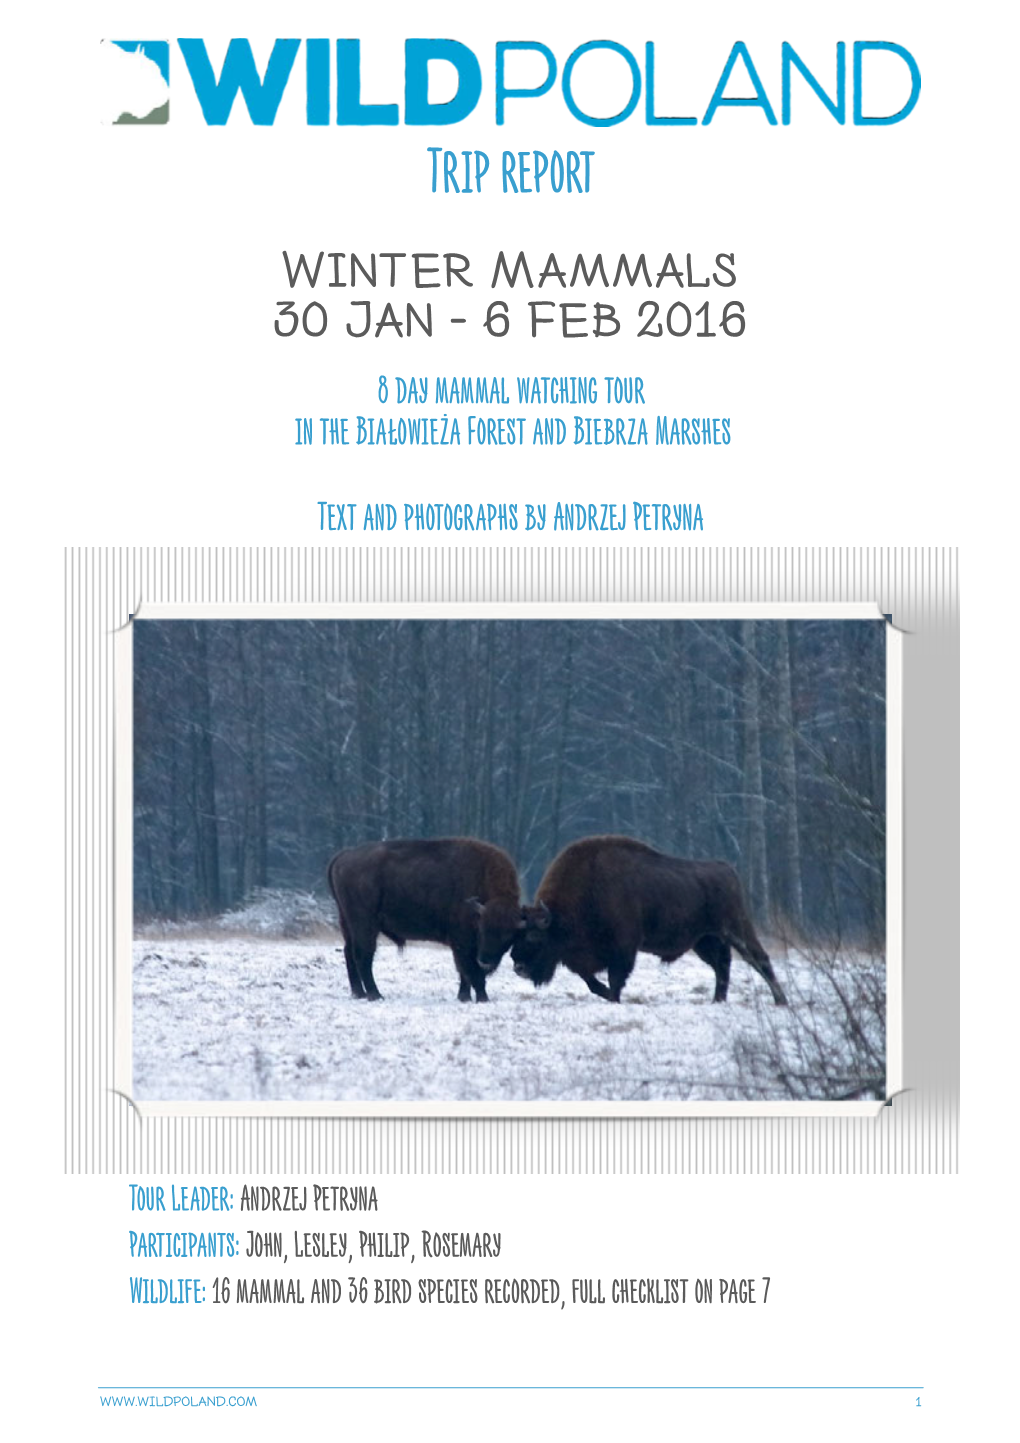 Winter Mammals Tour in Białowieża Forest and Biebrza Marshes, 2016